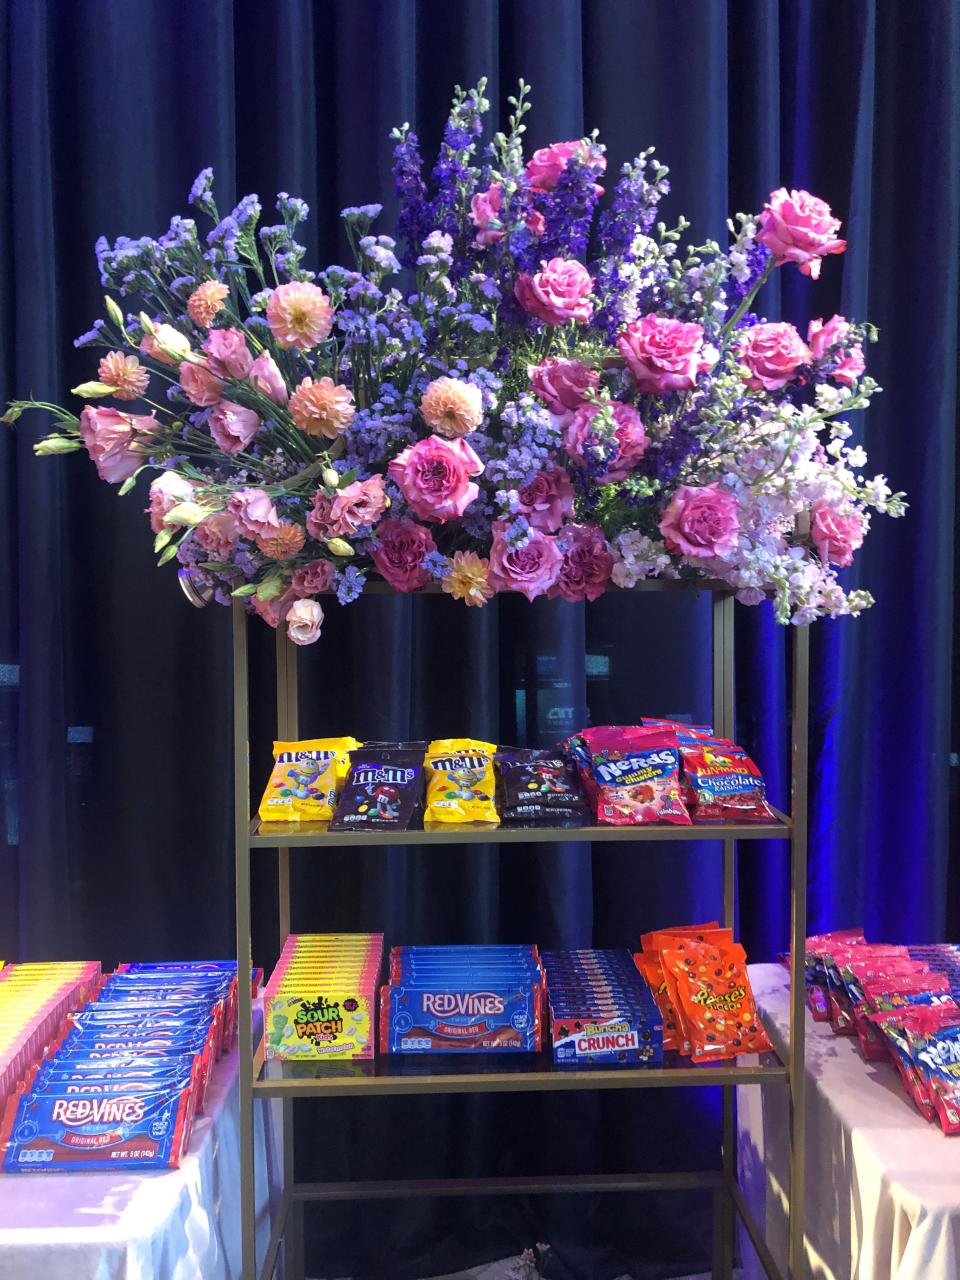 The world premiere of the "Era's Tour" movie featured an elaborate bar of candy for guests.